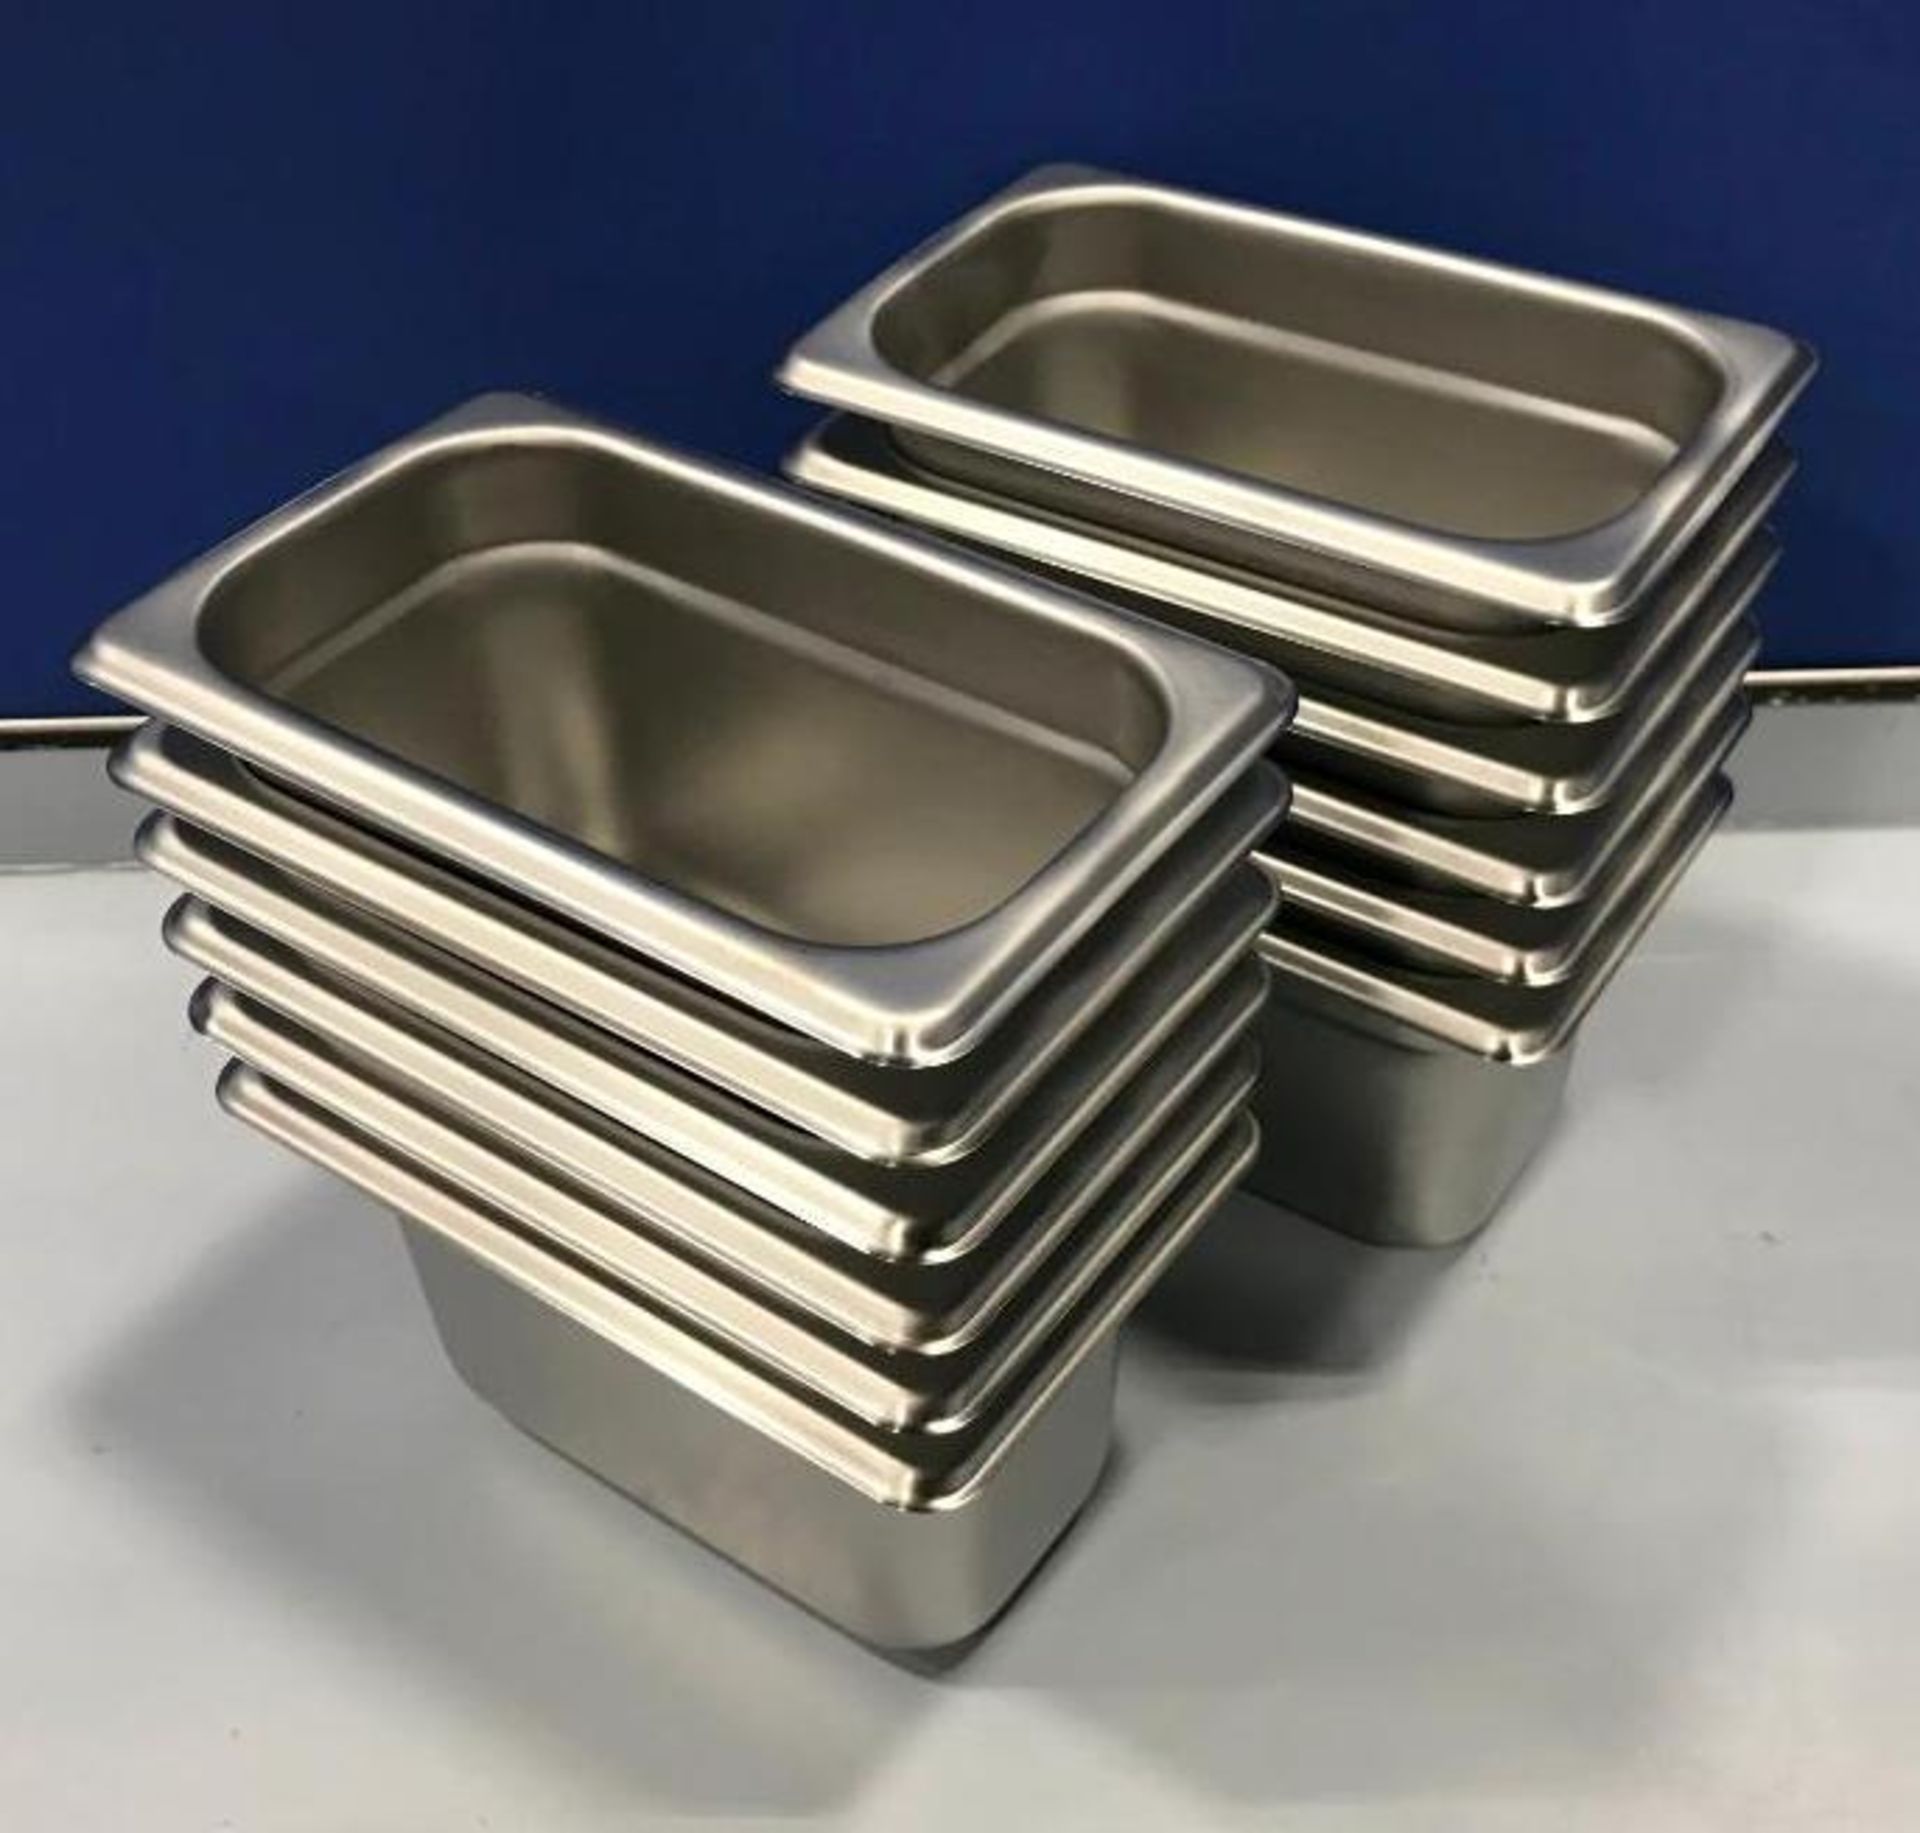 1/9 SIZE 4" DEEP STAINLESS STEEL INSERT, JOHNSON ROSE 58904 - LOT OF 12 - NEW - Image 2 of 3